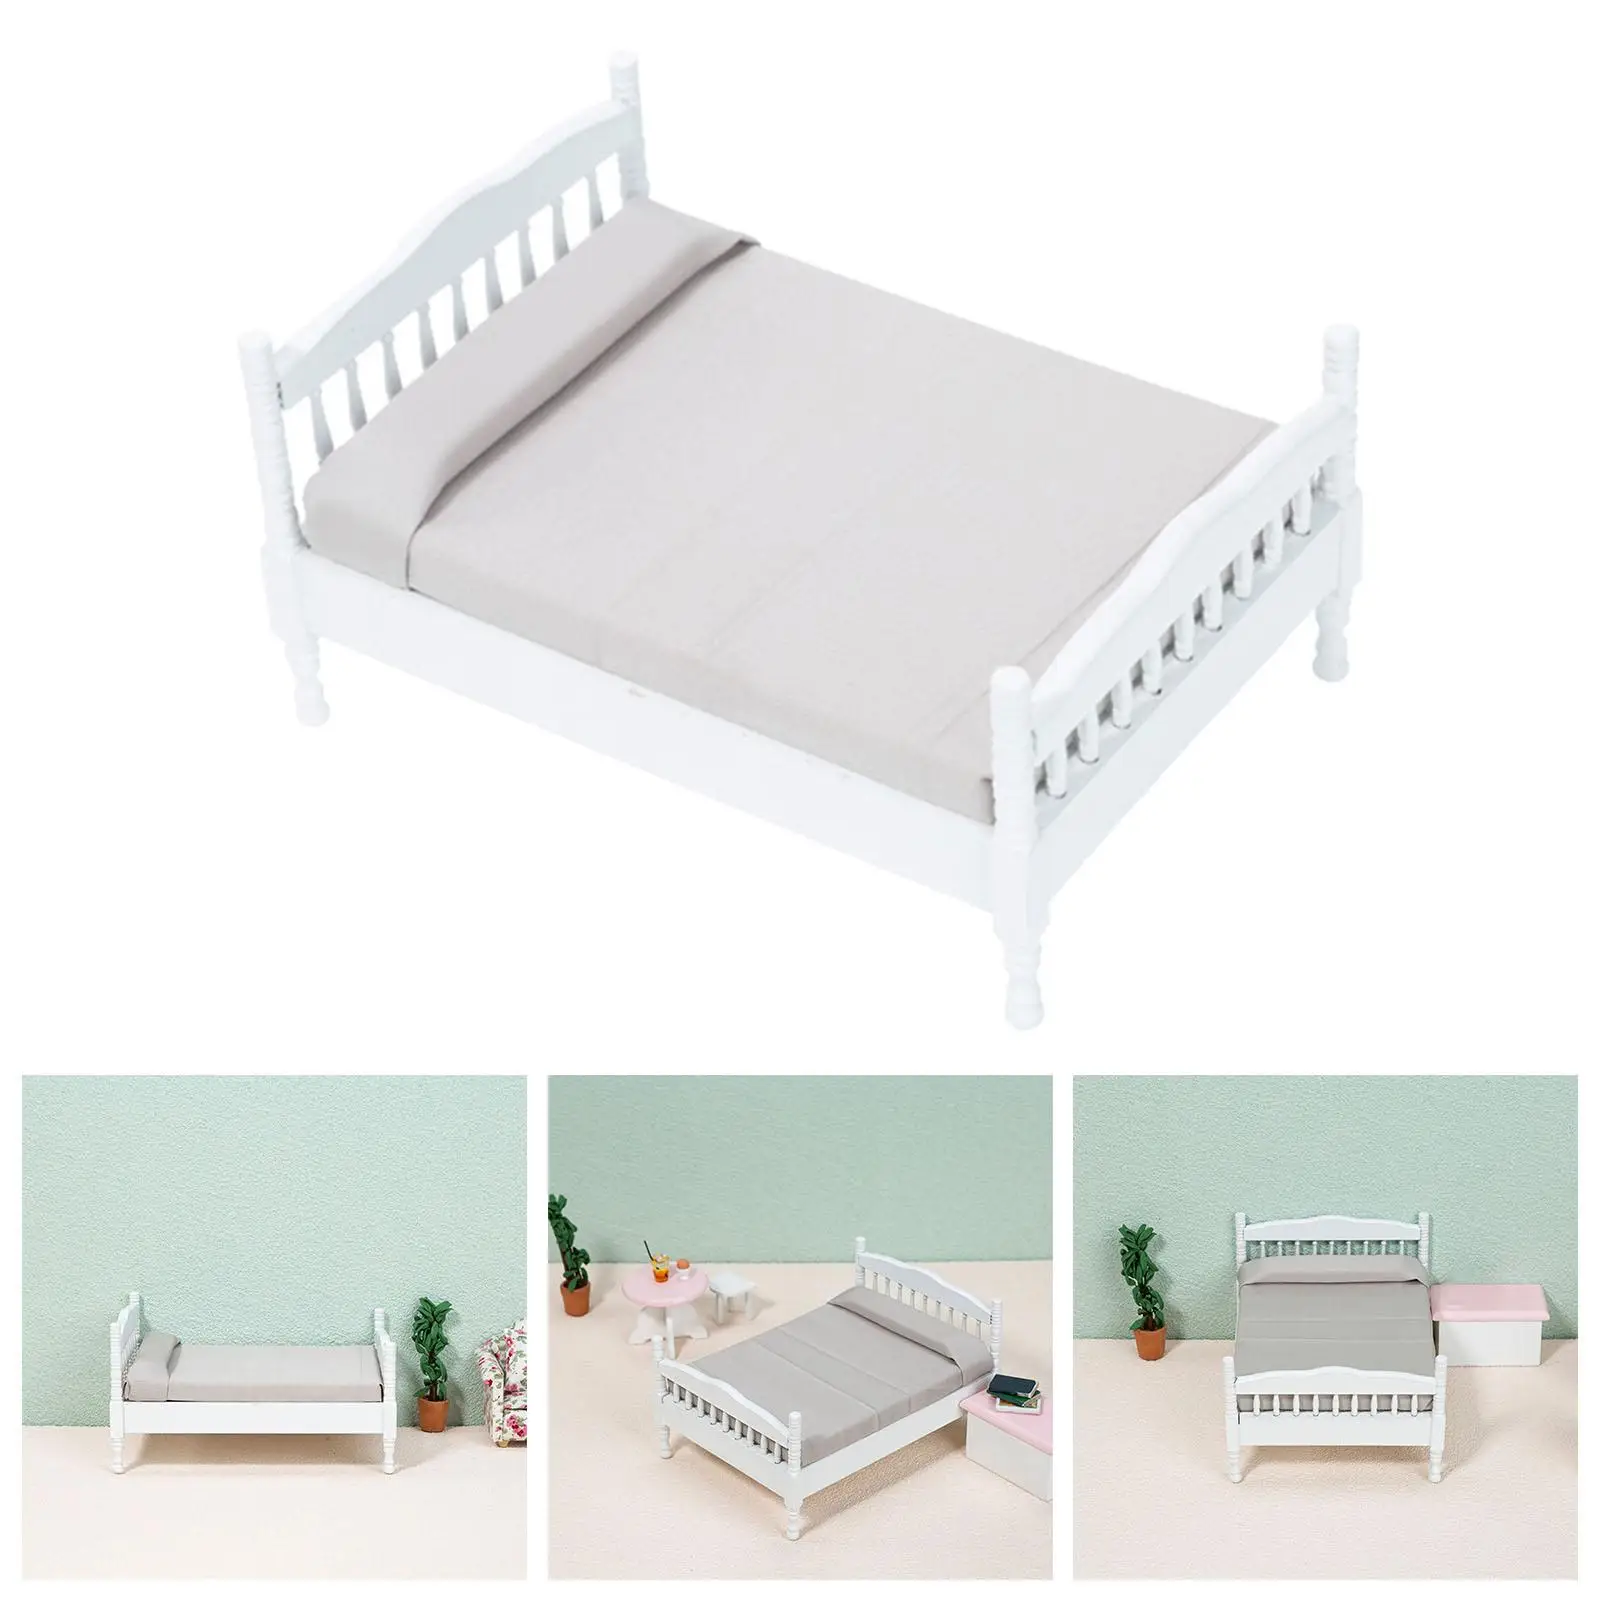 Handcrafted Dollhouse Mini Bed Doll House Furnishings Model Toys Pretend Play Toy 1/12 Wooden Double Bed for Girls Adults Gifts